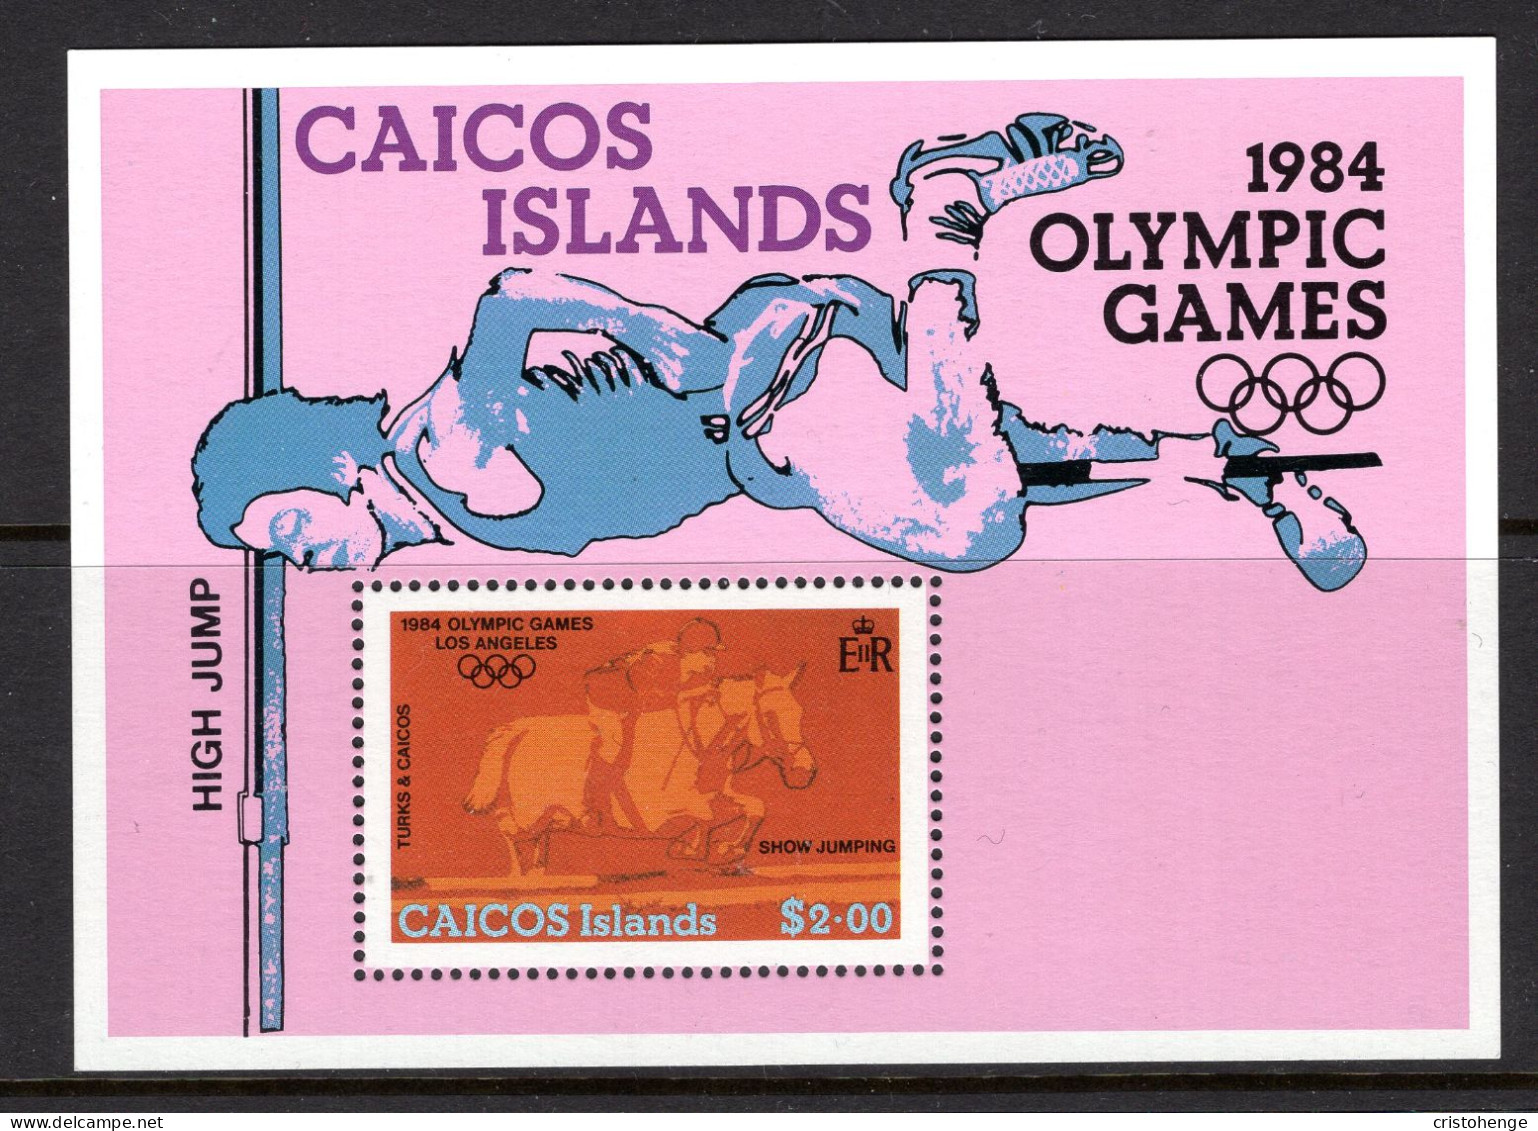 Caicos Islands 1984 Olympic Games, Los Angeles MS MNH (SG MS49) - Turks & Caicos